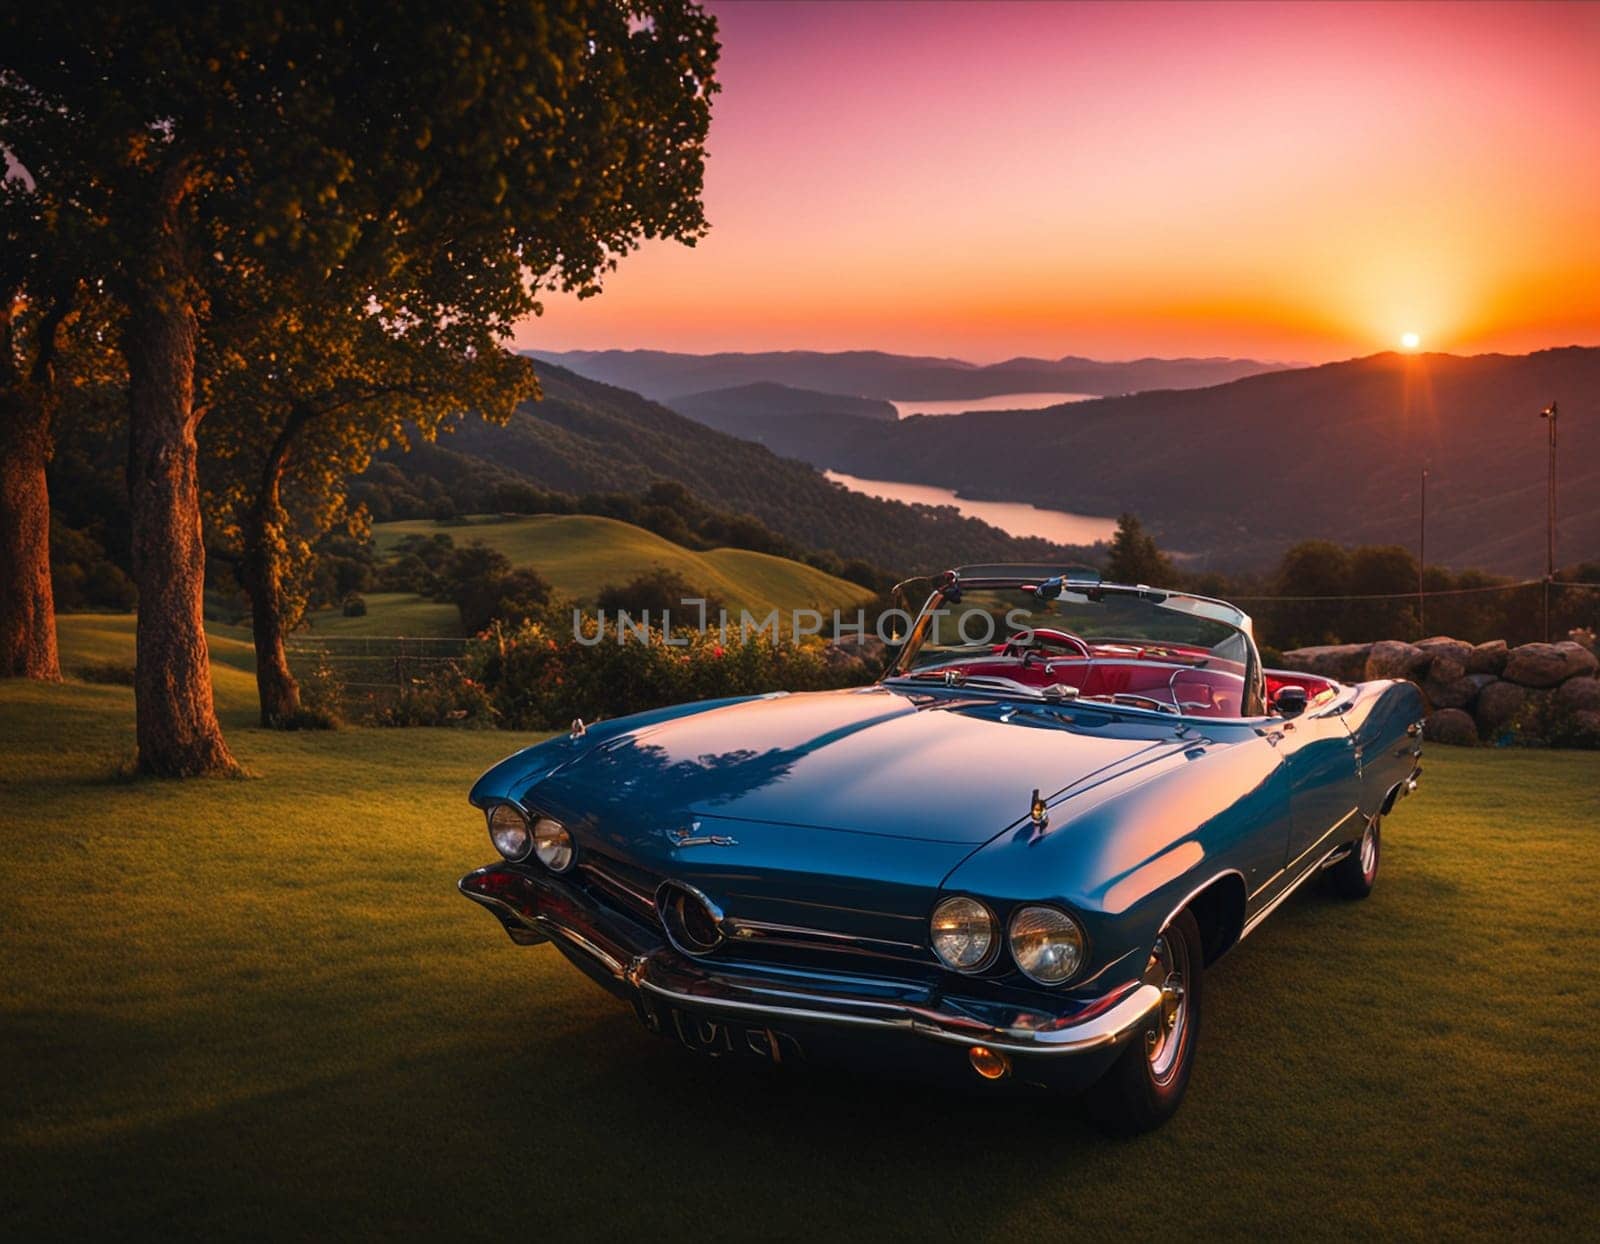 A classic car parked in the grass at sunset. High quality illustration